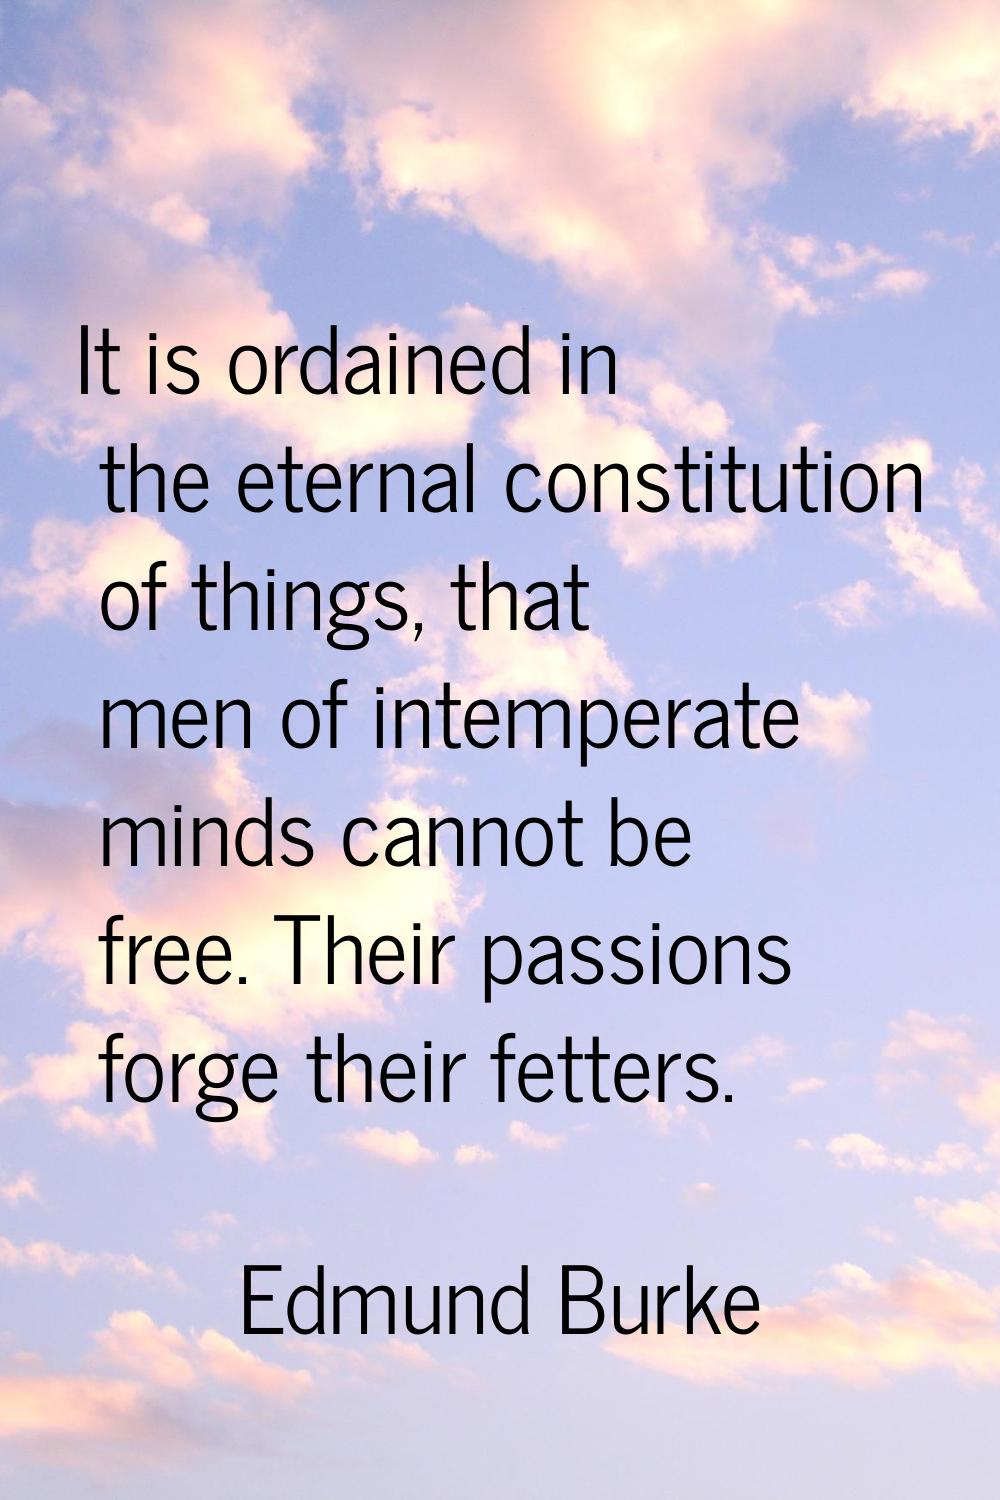 It is ordained in the eternal constitution of things, that men of intemperate minds cannot be free.